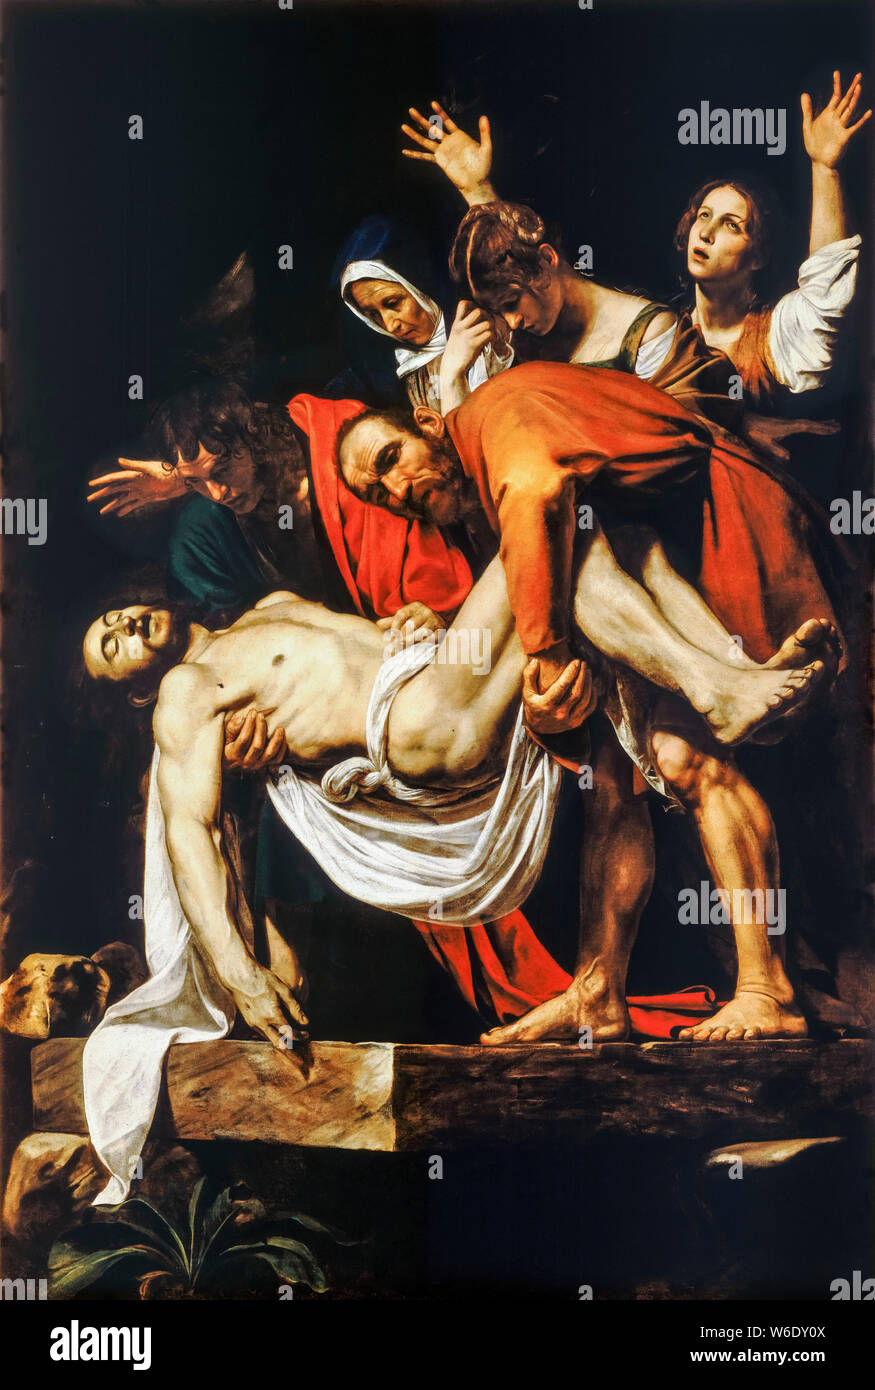 Caravaggio, The Entombment of Christ, painting, 1602-1603 Stock Photo